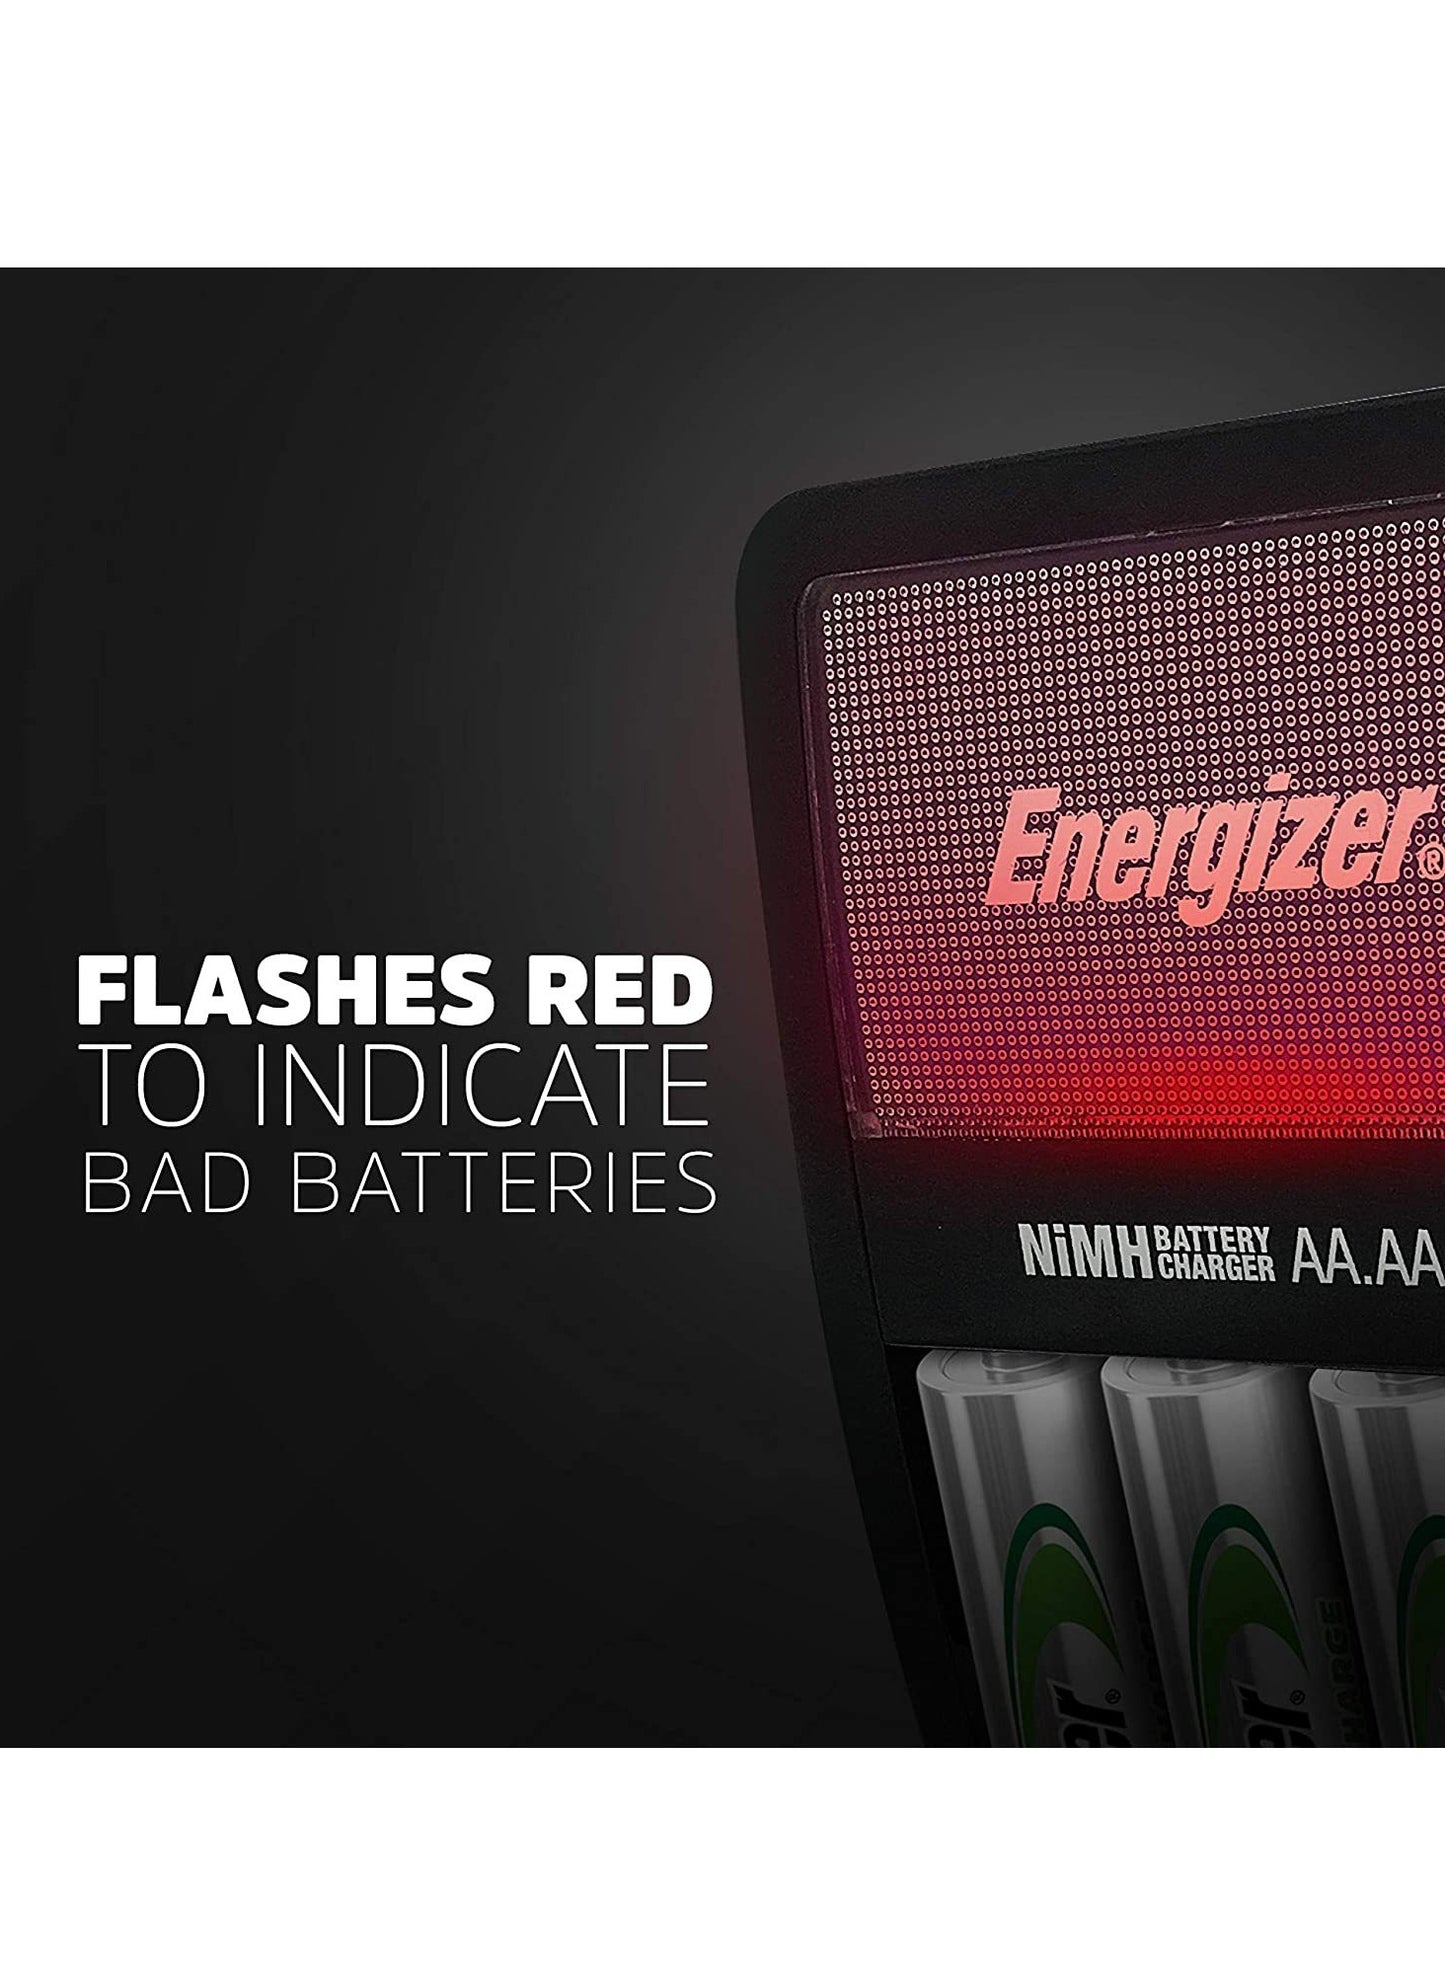 Energizer Maxi Charger with 4 AA Batteries Multicolour